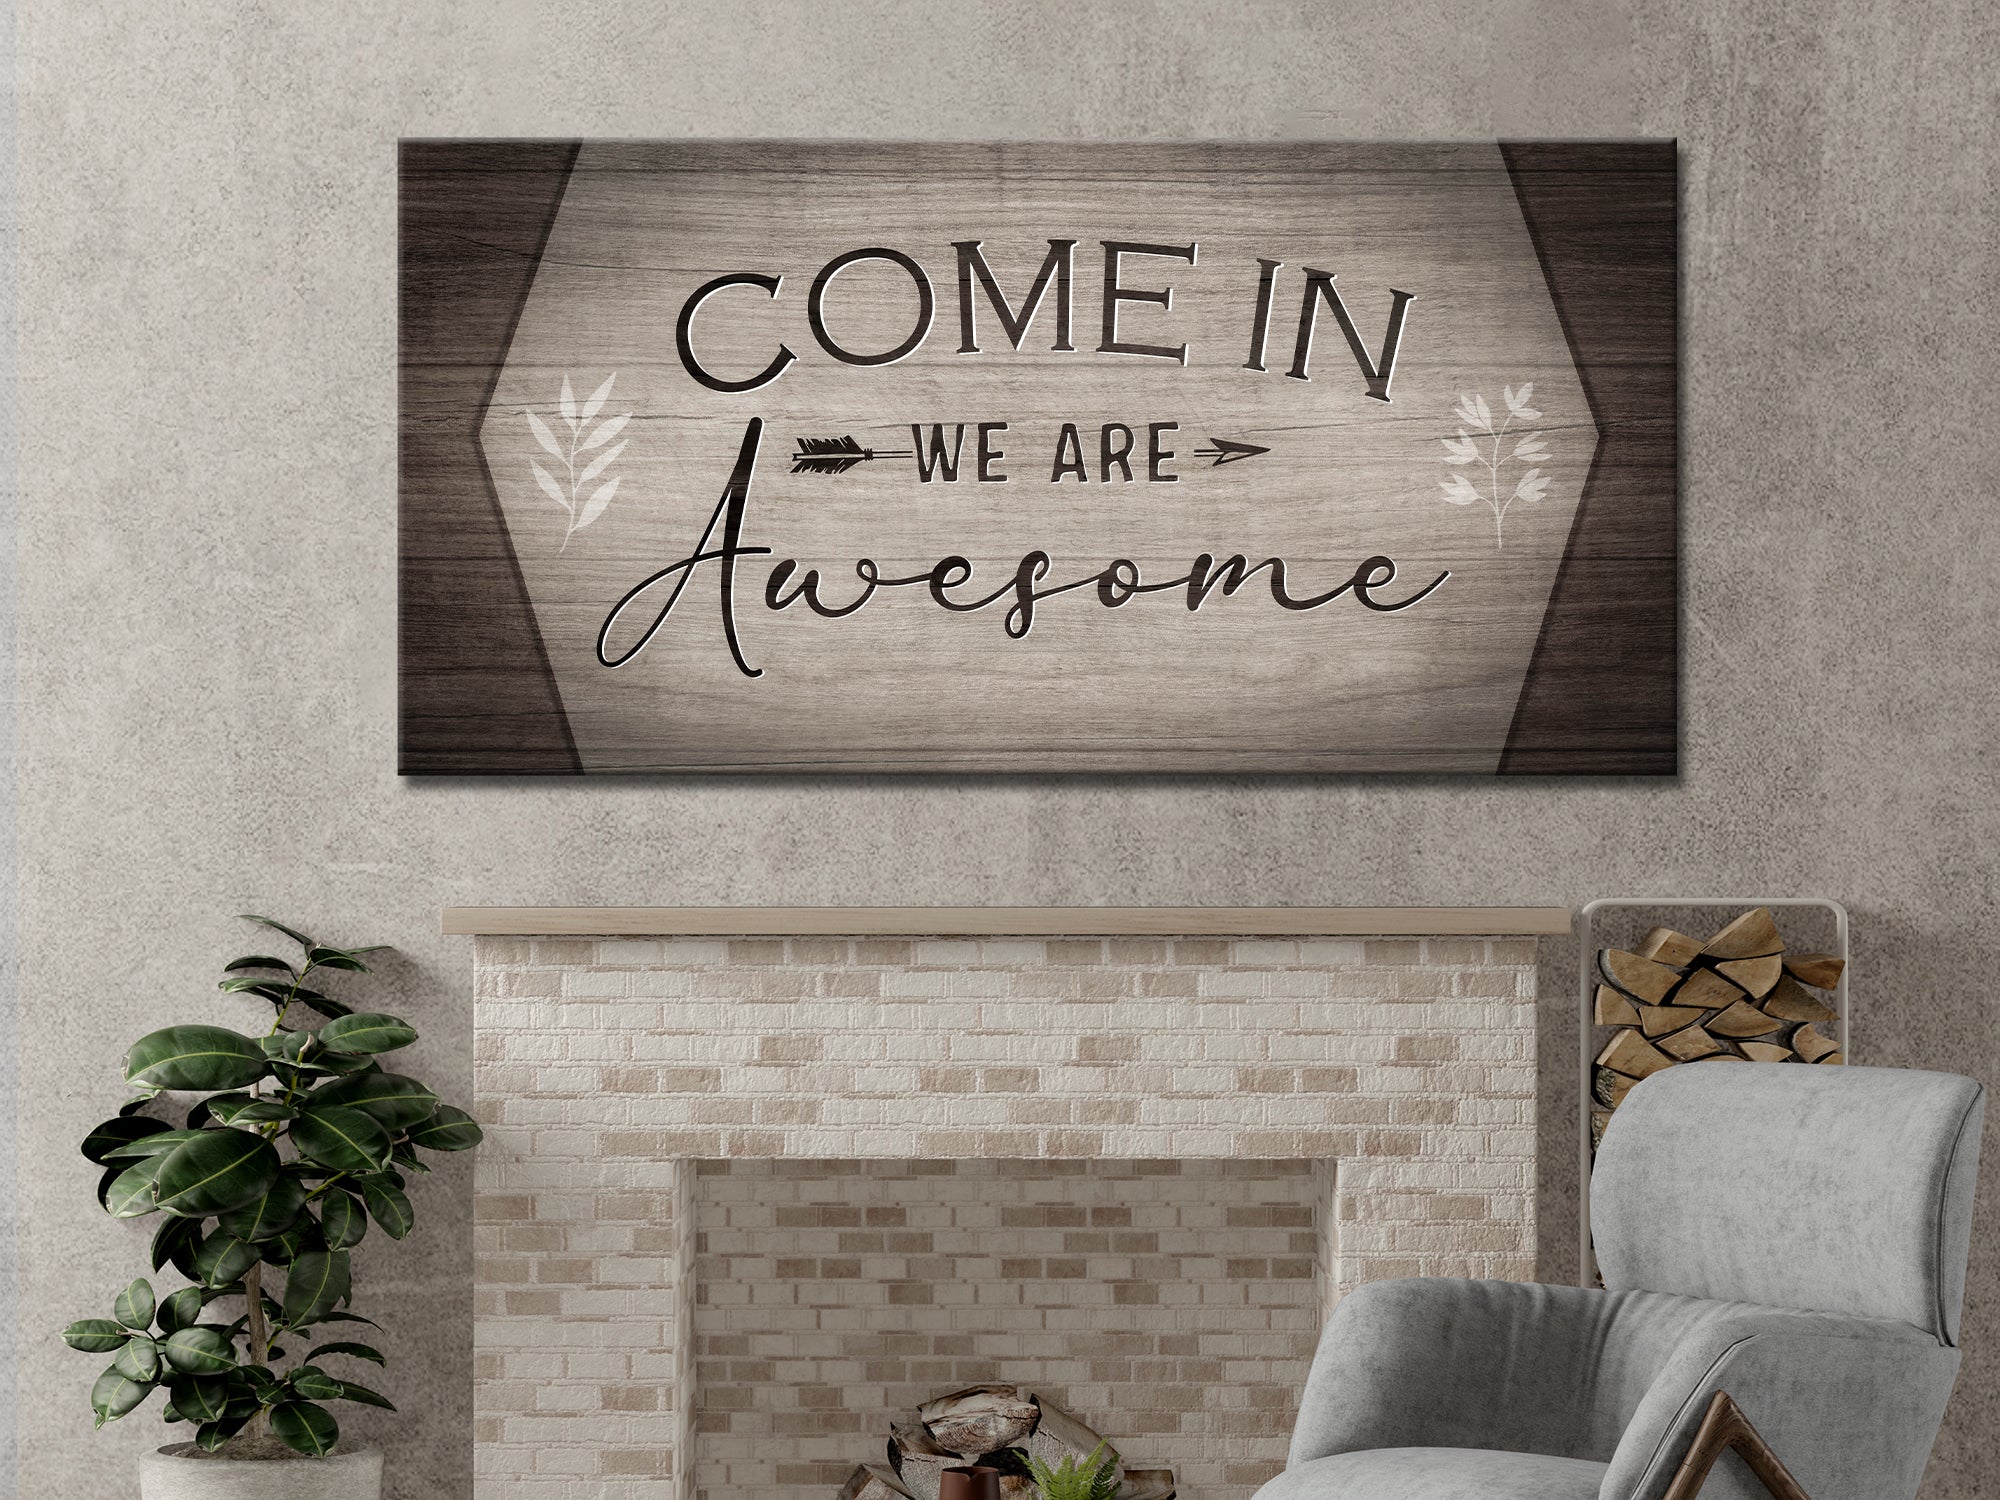 We Are Awesome - Living Room - Christian Canvas Wall Art